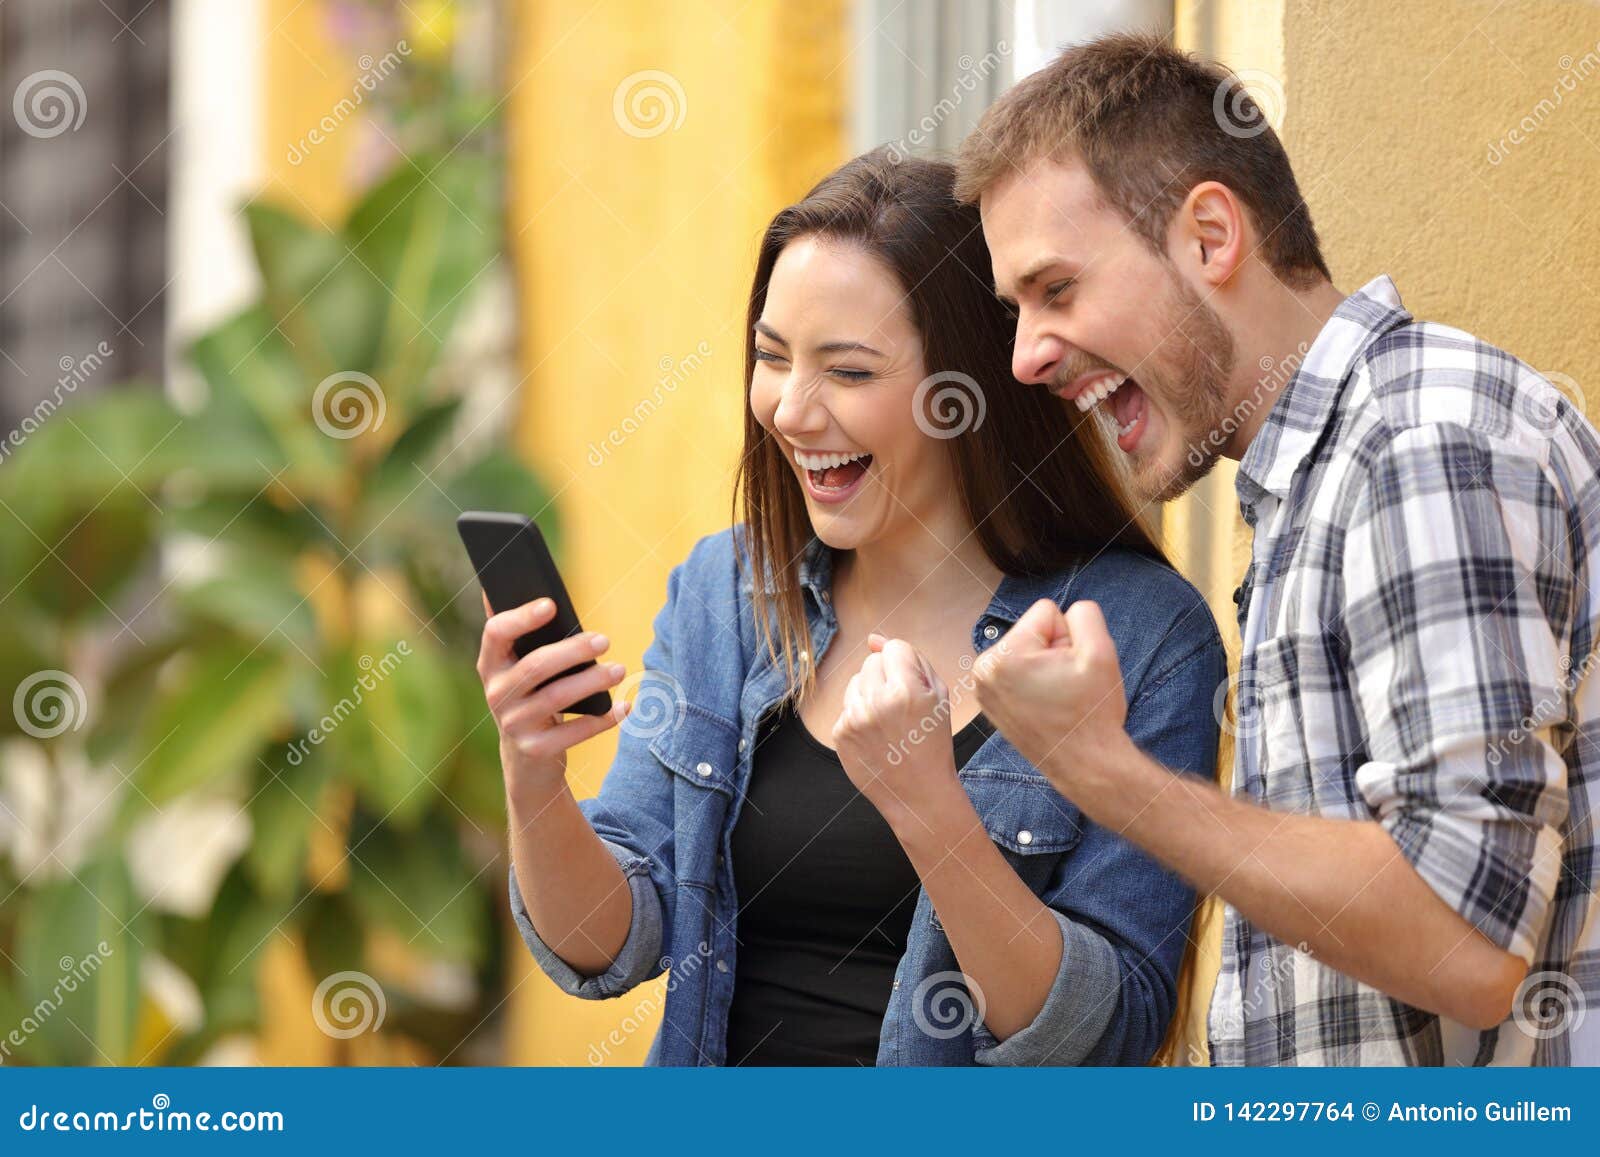 excited couple finding online offers on phone in the street